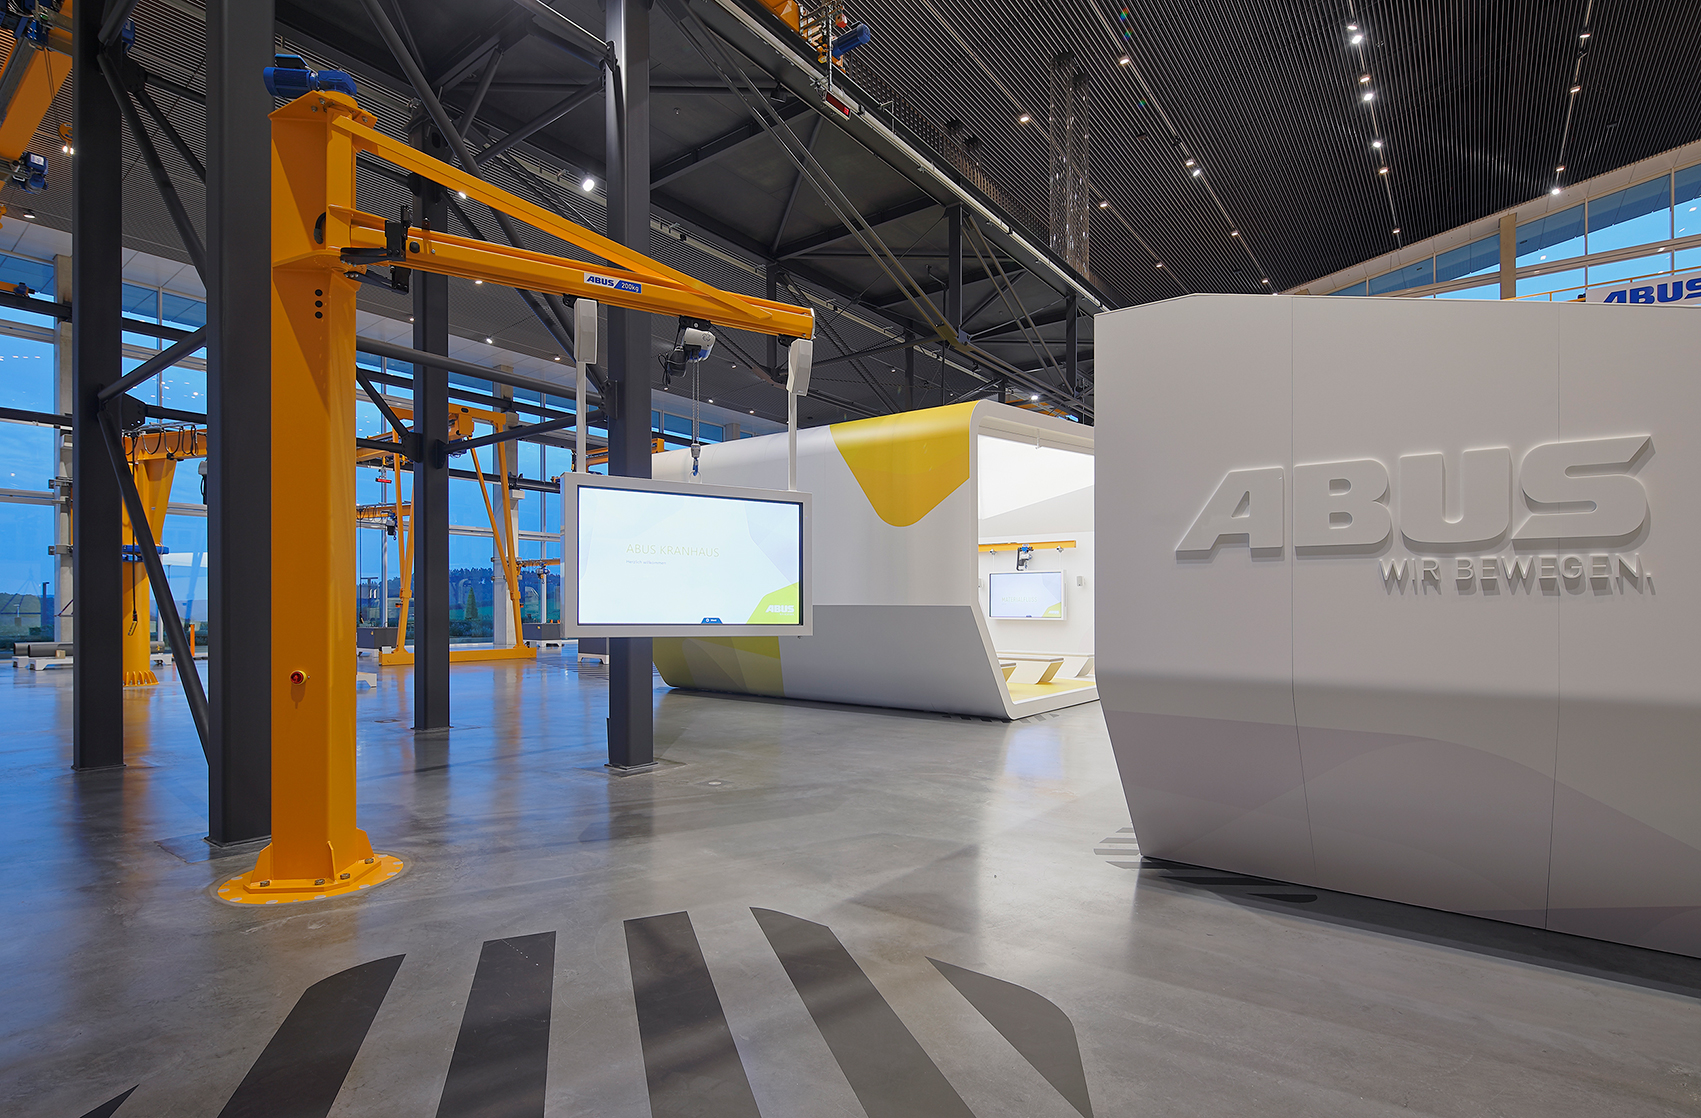 For more than 50 years, ABUS has been all about efficient and well-thought-out crane solutions for industrial and factory halls of all kinds. Abus Kransysteme GmbH is one of Europe's leading manufacturers and maintains production facilities for swing cranes and suspension systems and supports its customers worldwide with service and assembly services.